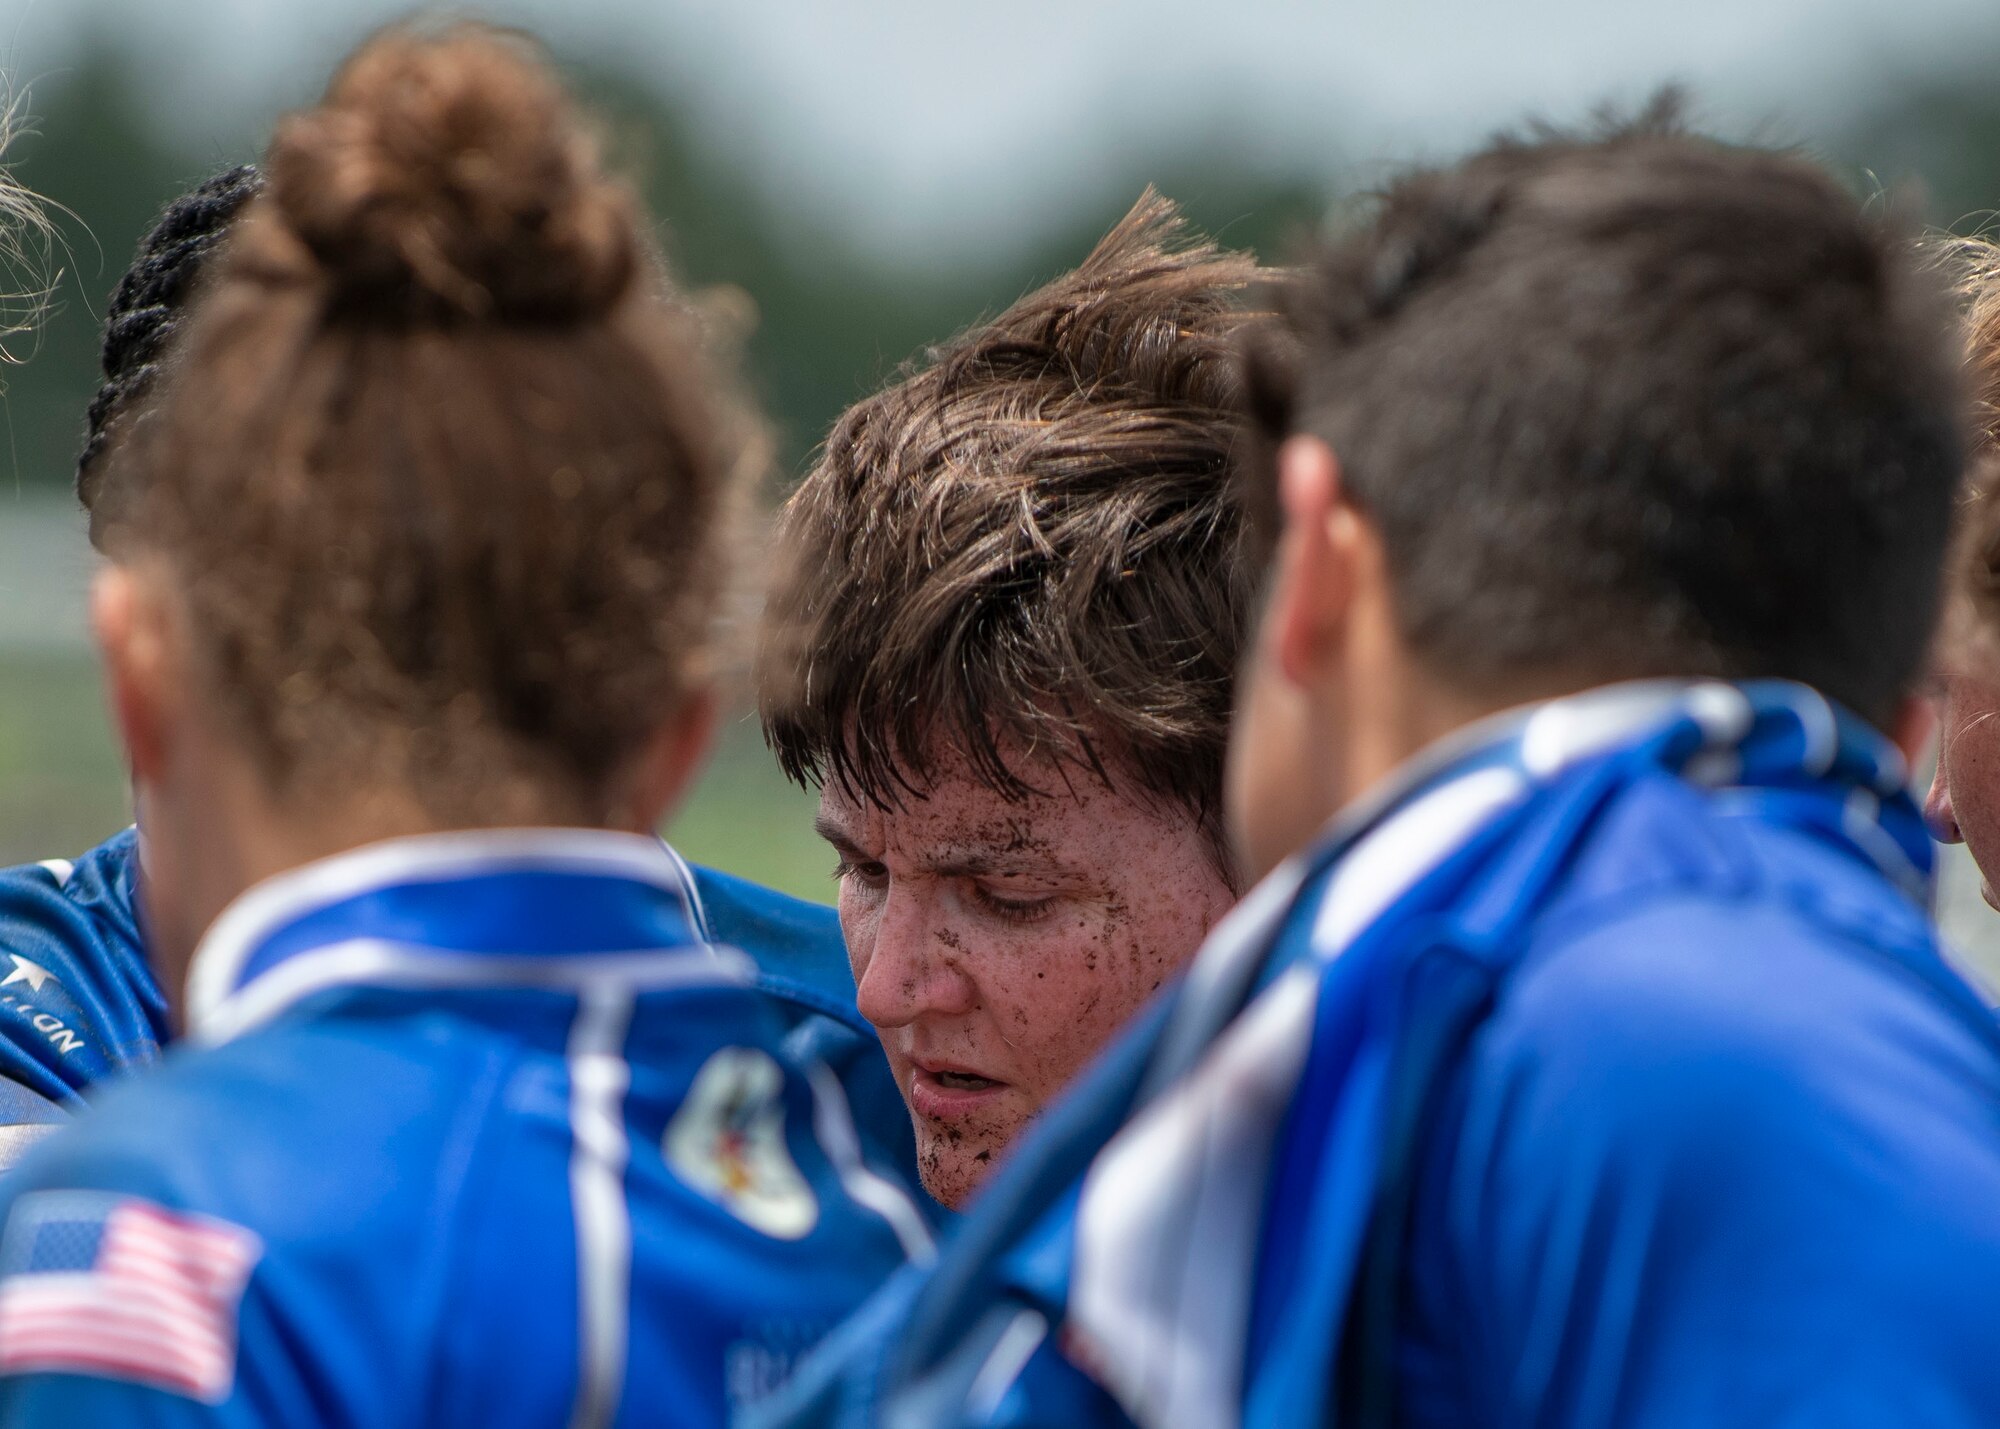 Capt. Robin Dodge, United States Air Force rugby player, meets for a team huddle during half time at the Annual Armed Forces Women’s Rugby Championship in Wilmington, North Carolina, June 26, 2021.